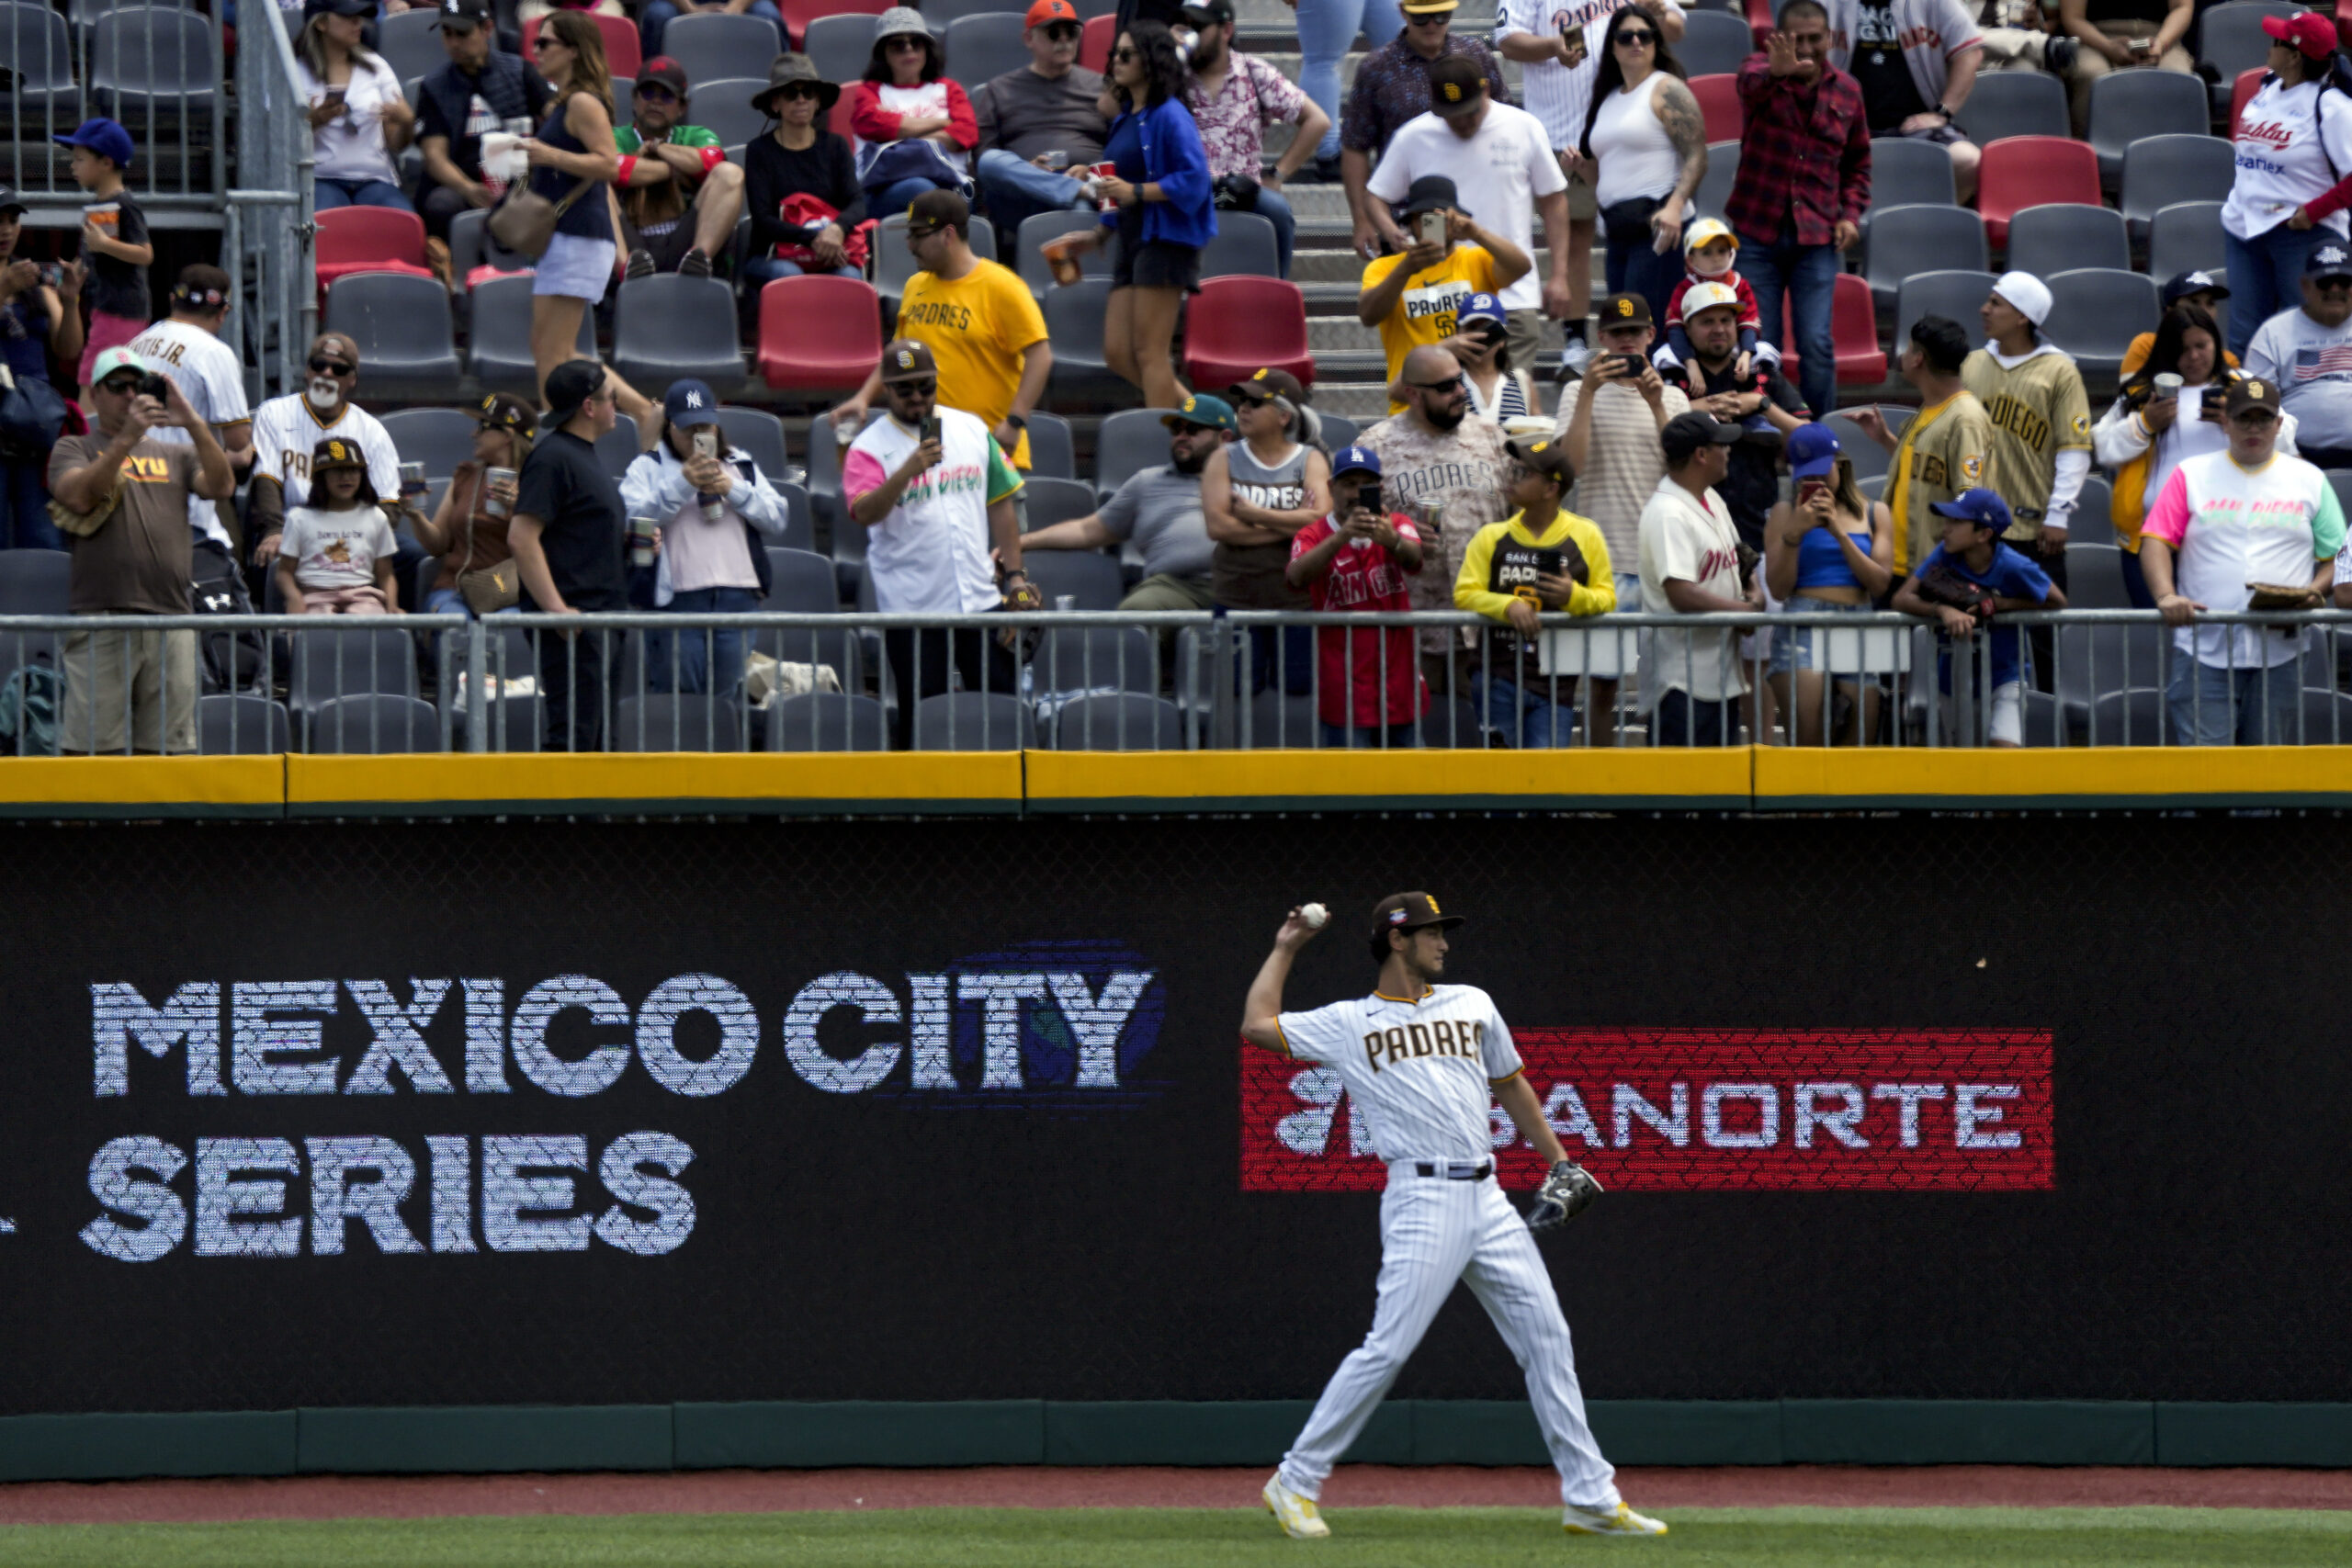 5-things-you-should-know-about-the-mlb-mexico-city-series